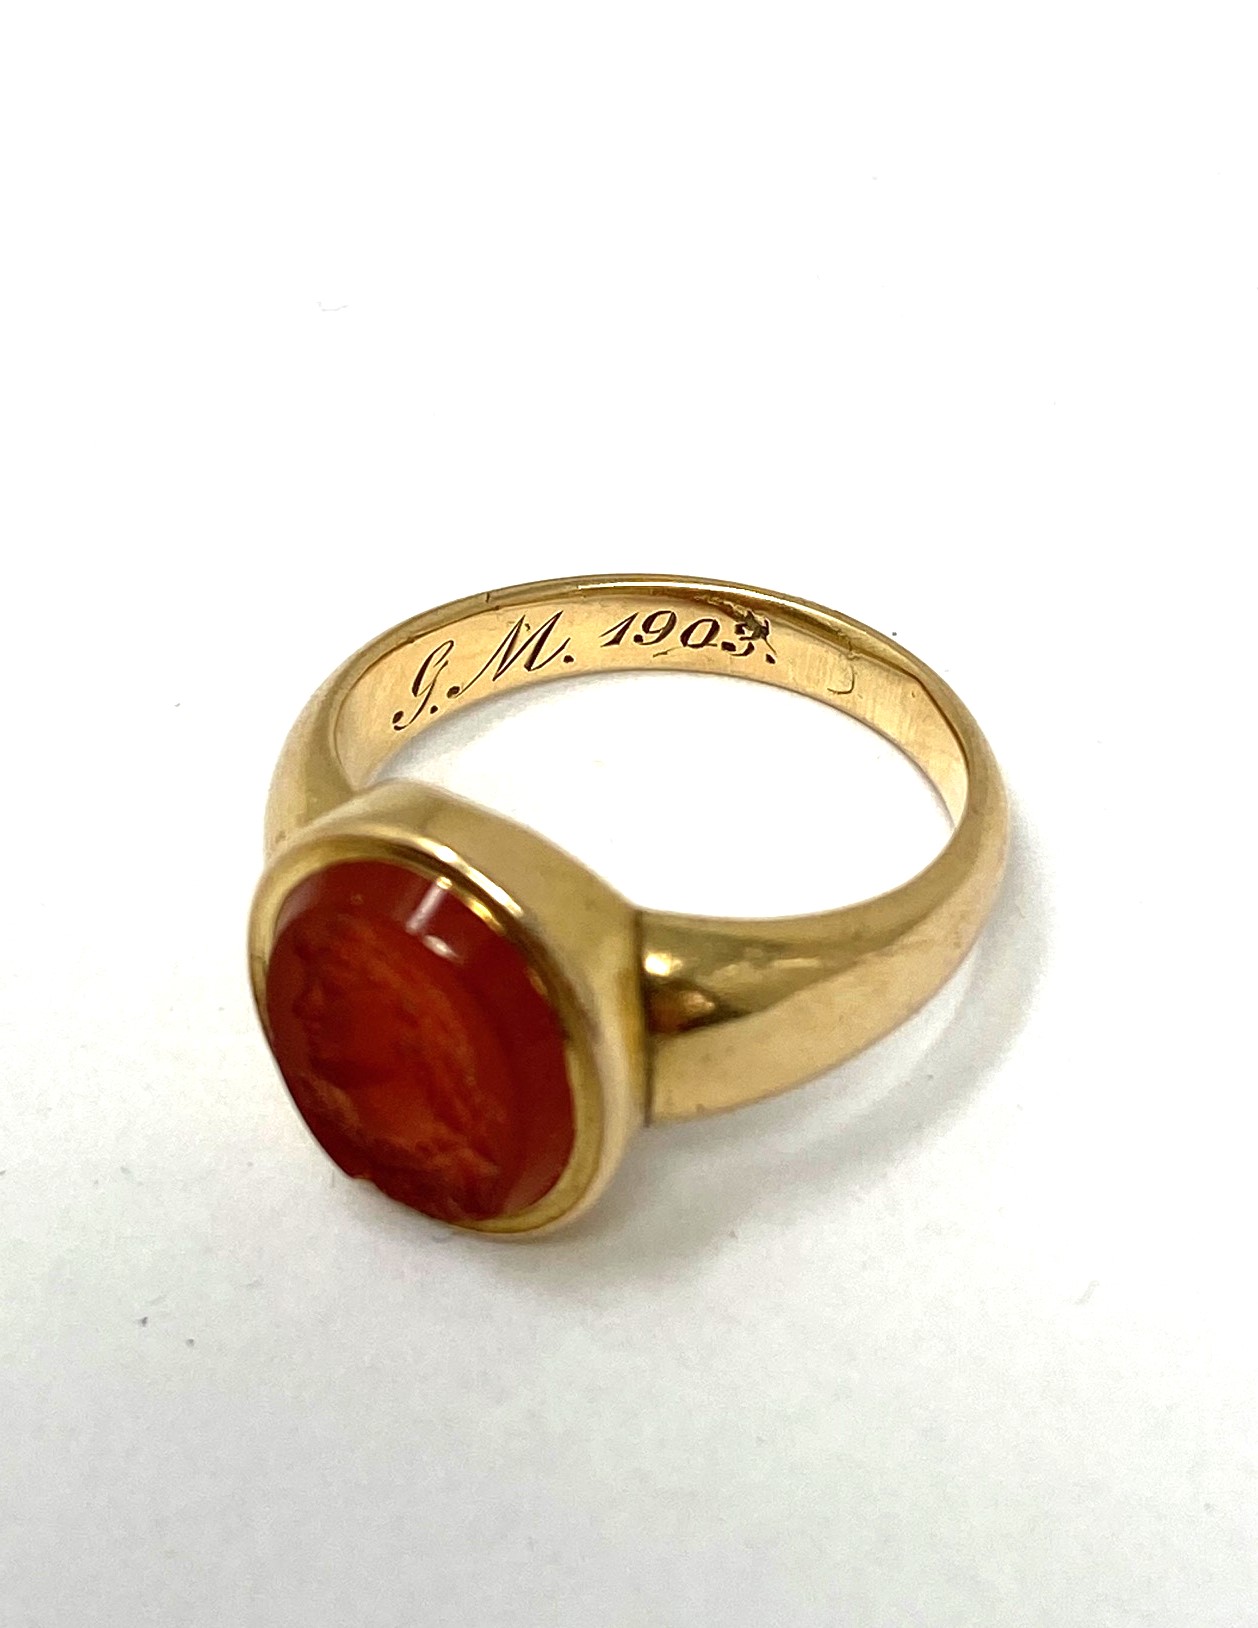 CARNELIAN INTAGLIO GOLD SIGNET RING, EARLY 19TH CENTURY - Image 5 of 6